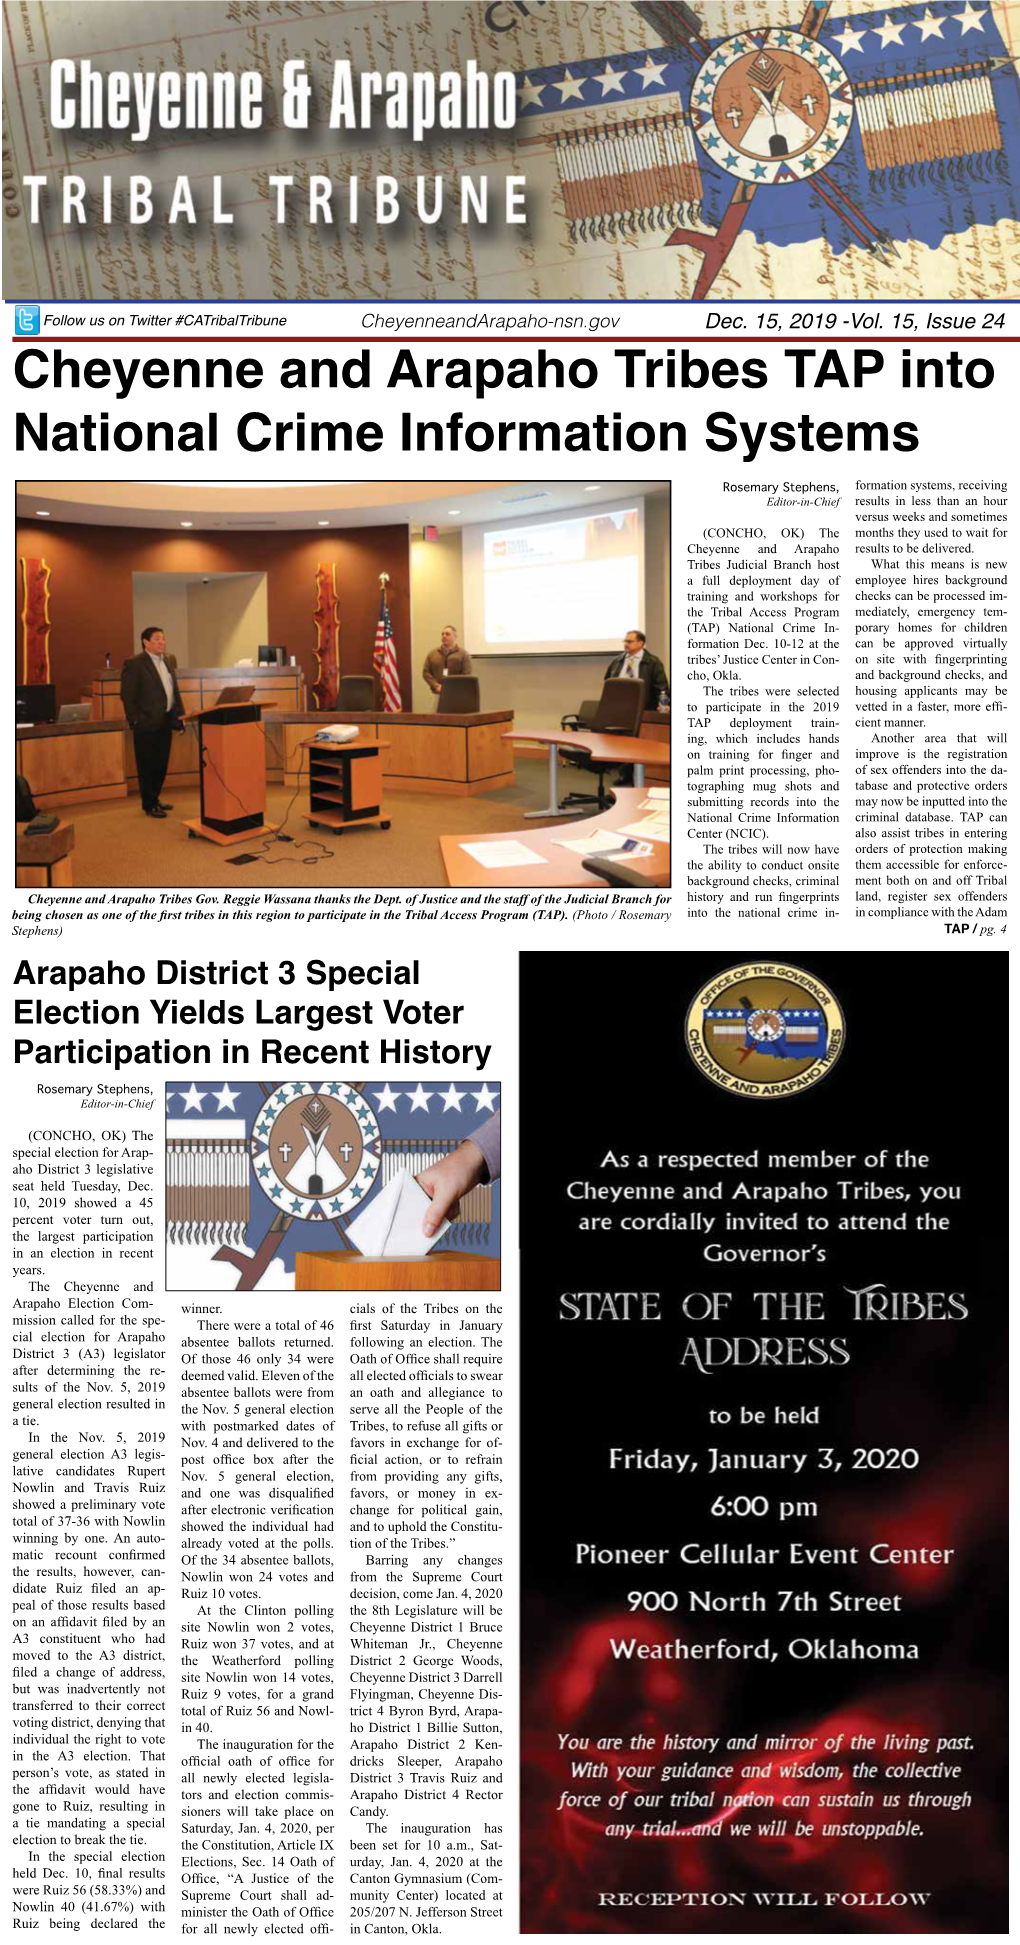 Cheyenne and Arapaho Tribes TAP Into National Crime Information